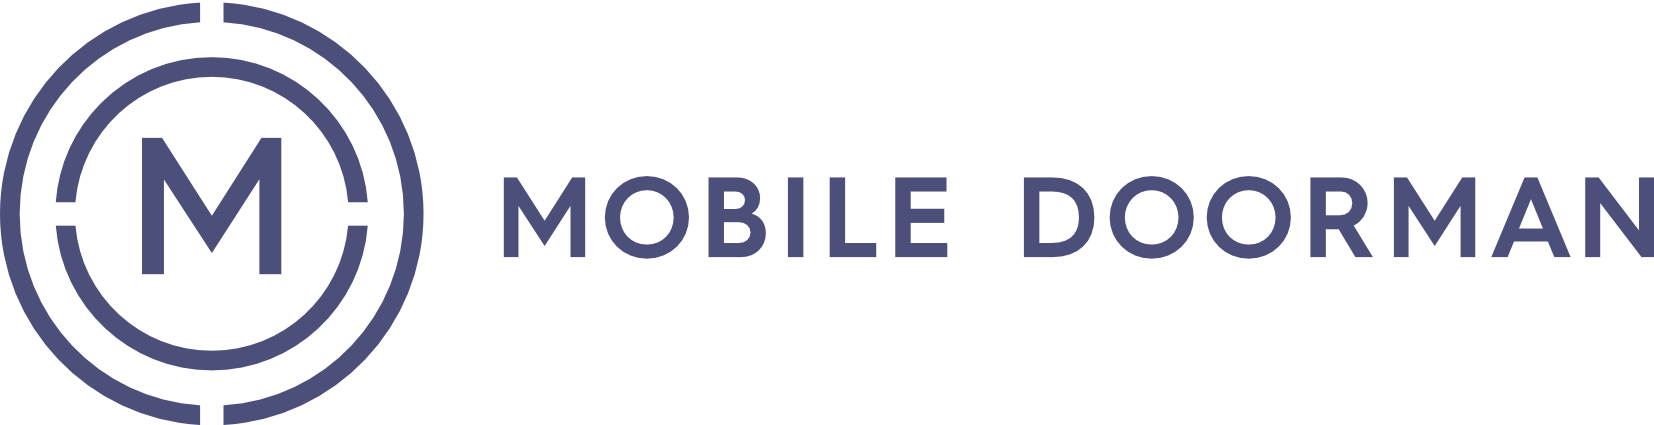 Mobile Doorman, the industry-leading creator of custom-branded apartment apps for multifamily communities across the United States